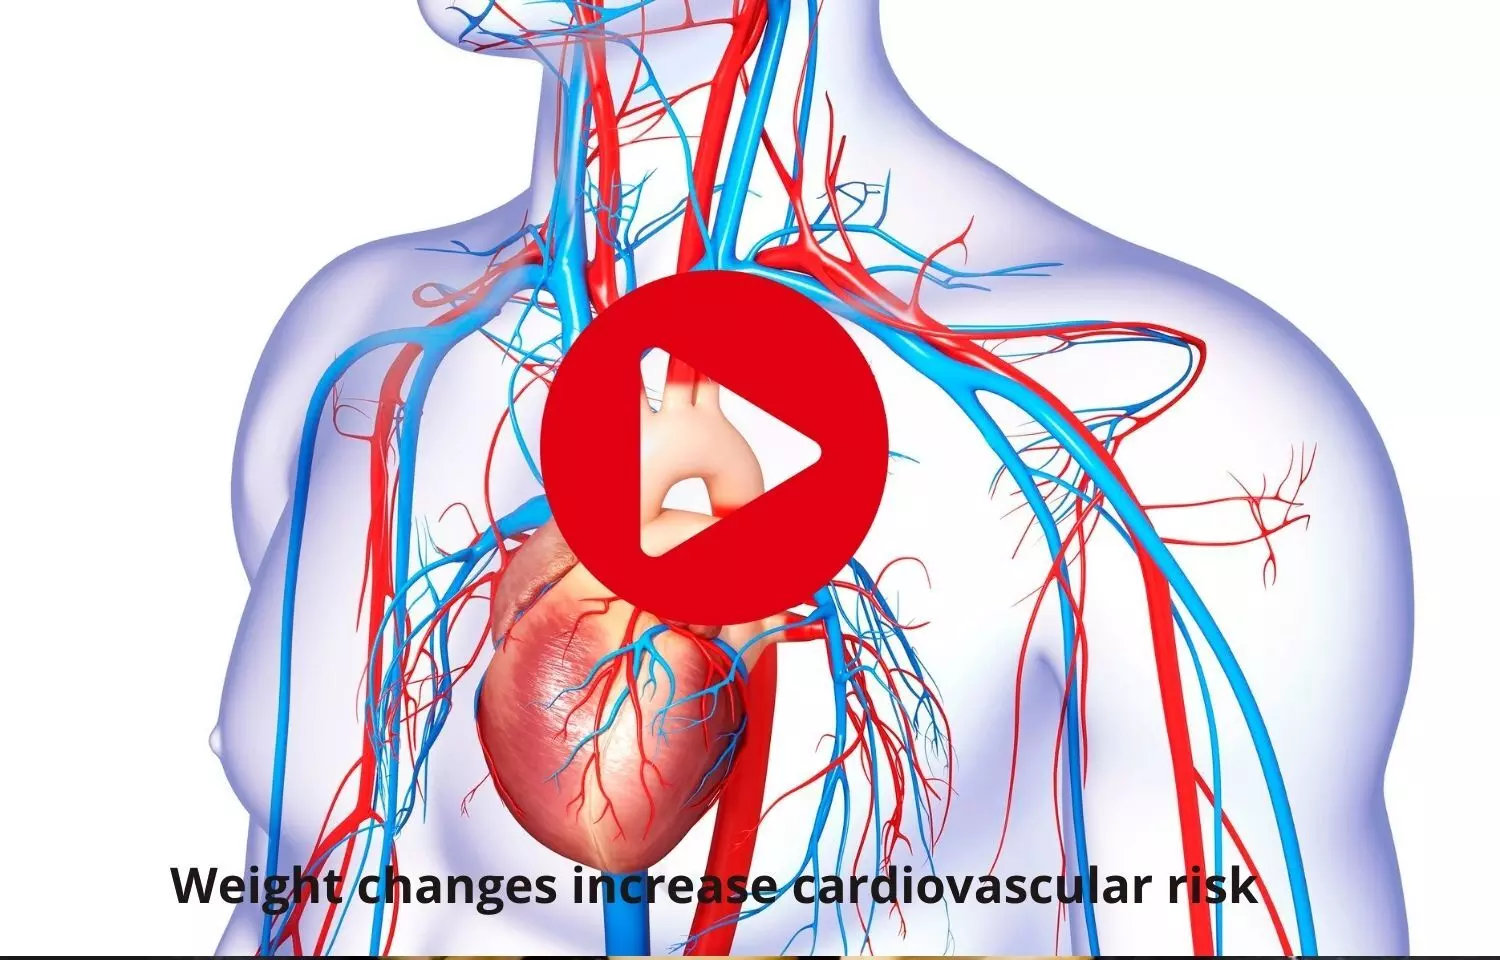 Weight fluctuations to influence cardiovascular risks